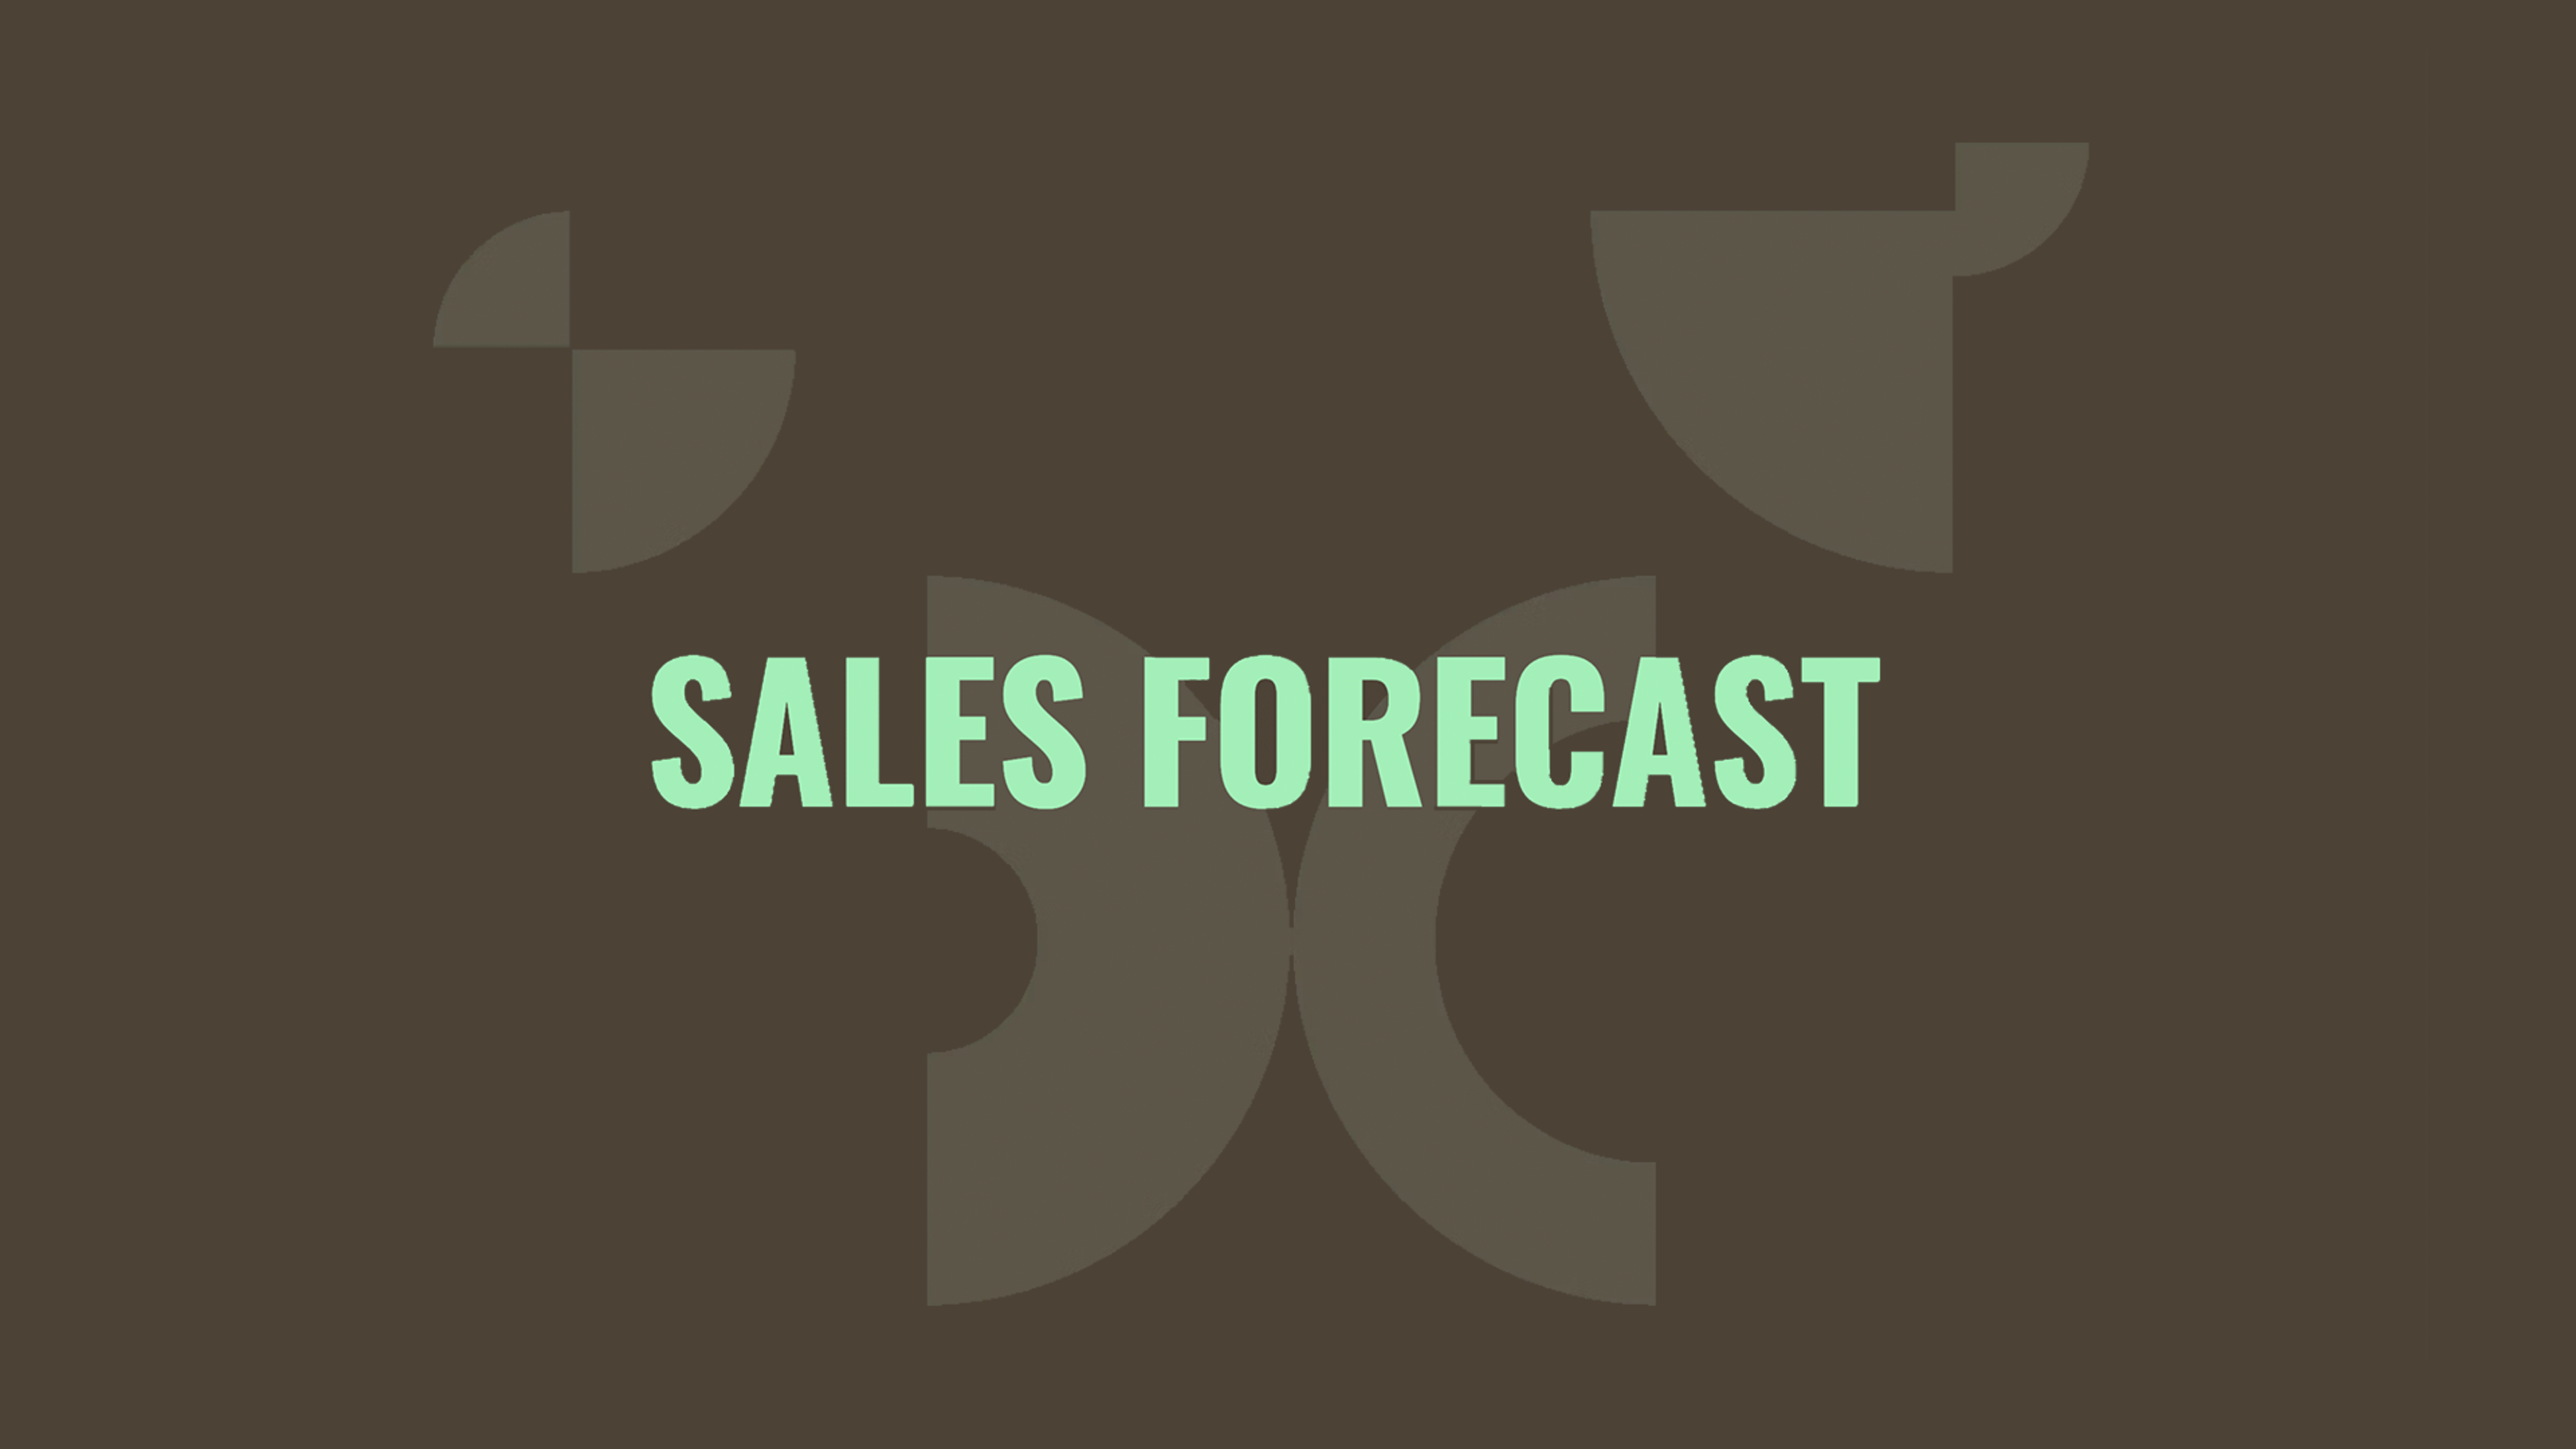 Sales Forecast - Introduction